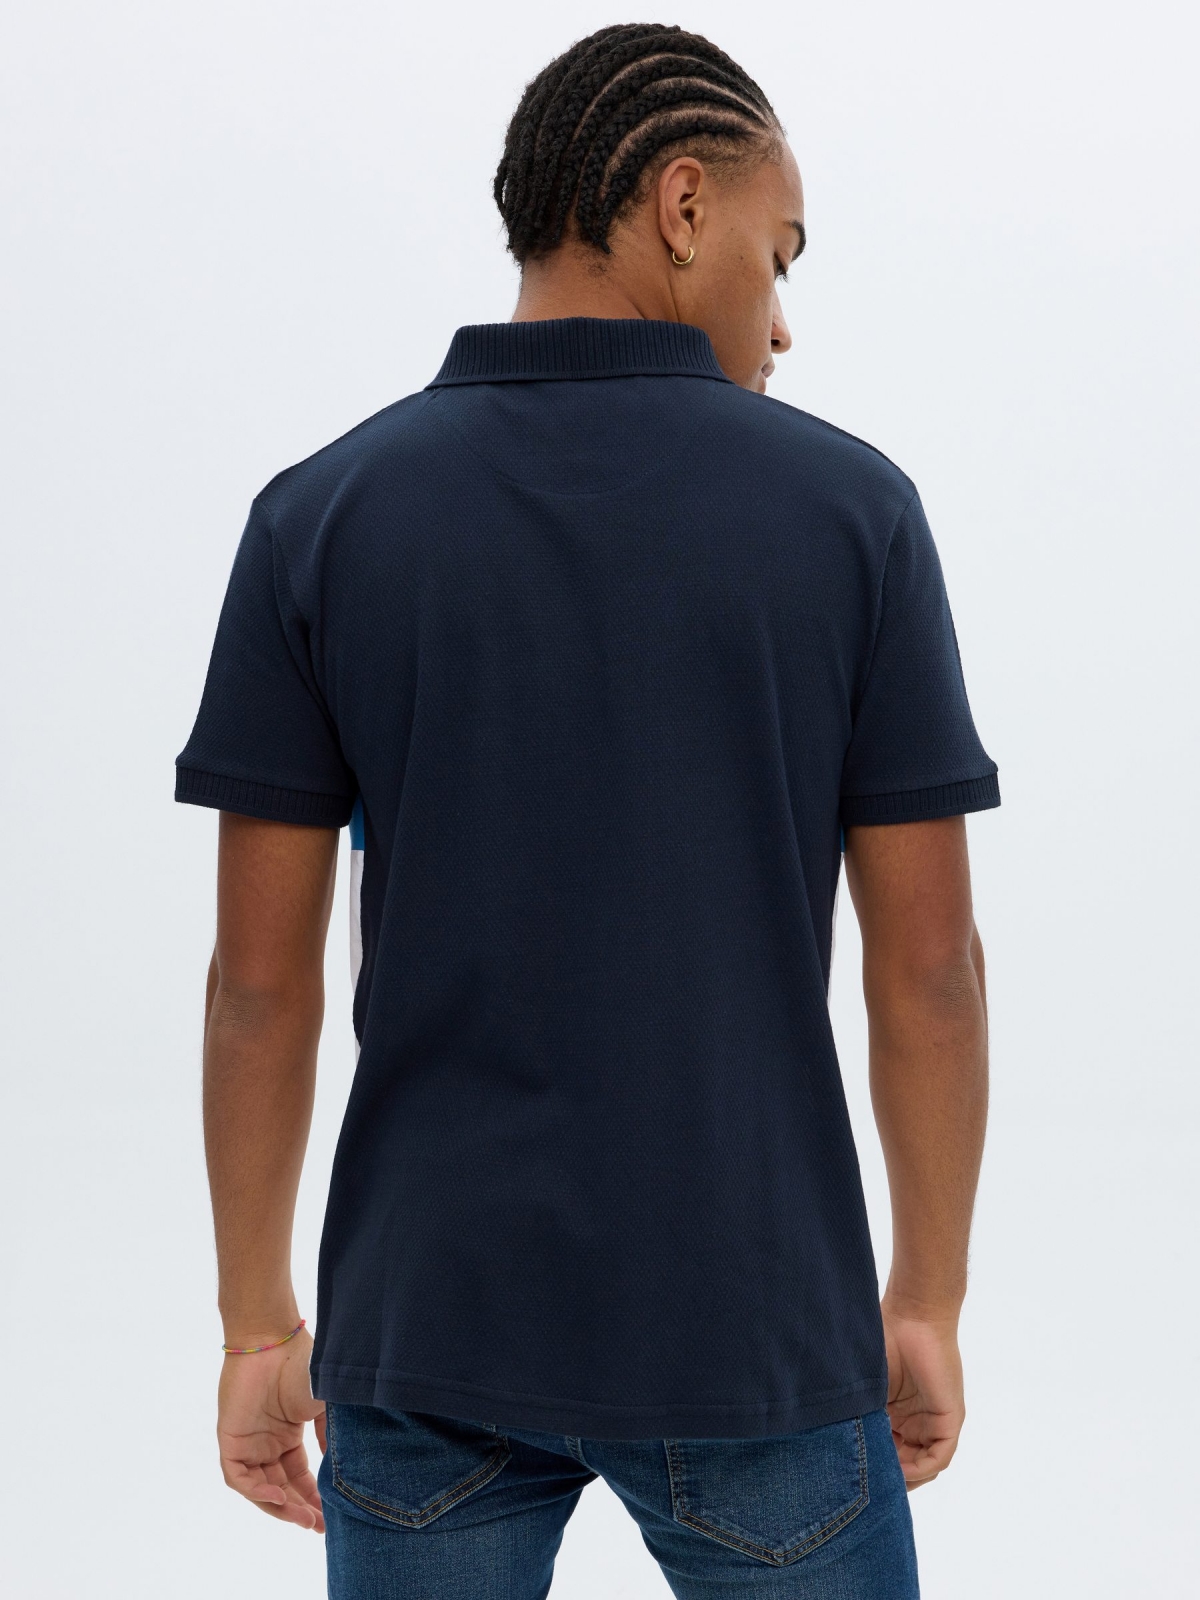 Woven striped polo shirt navy middle back view